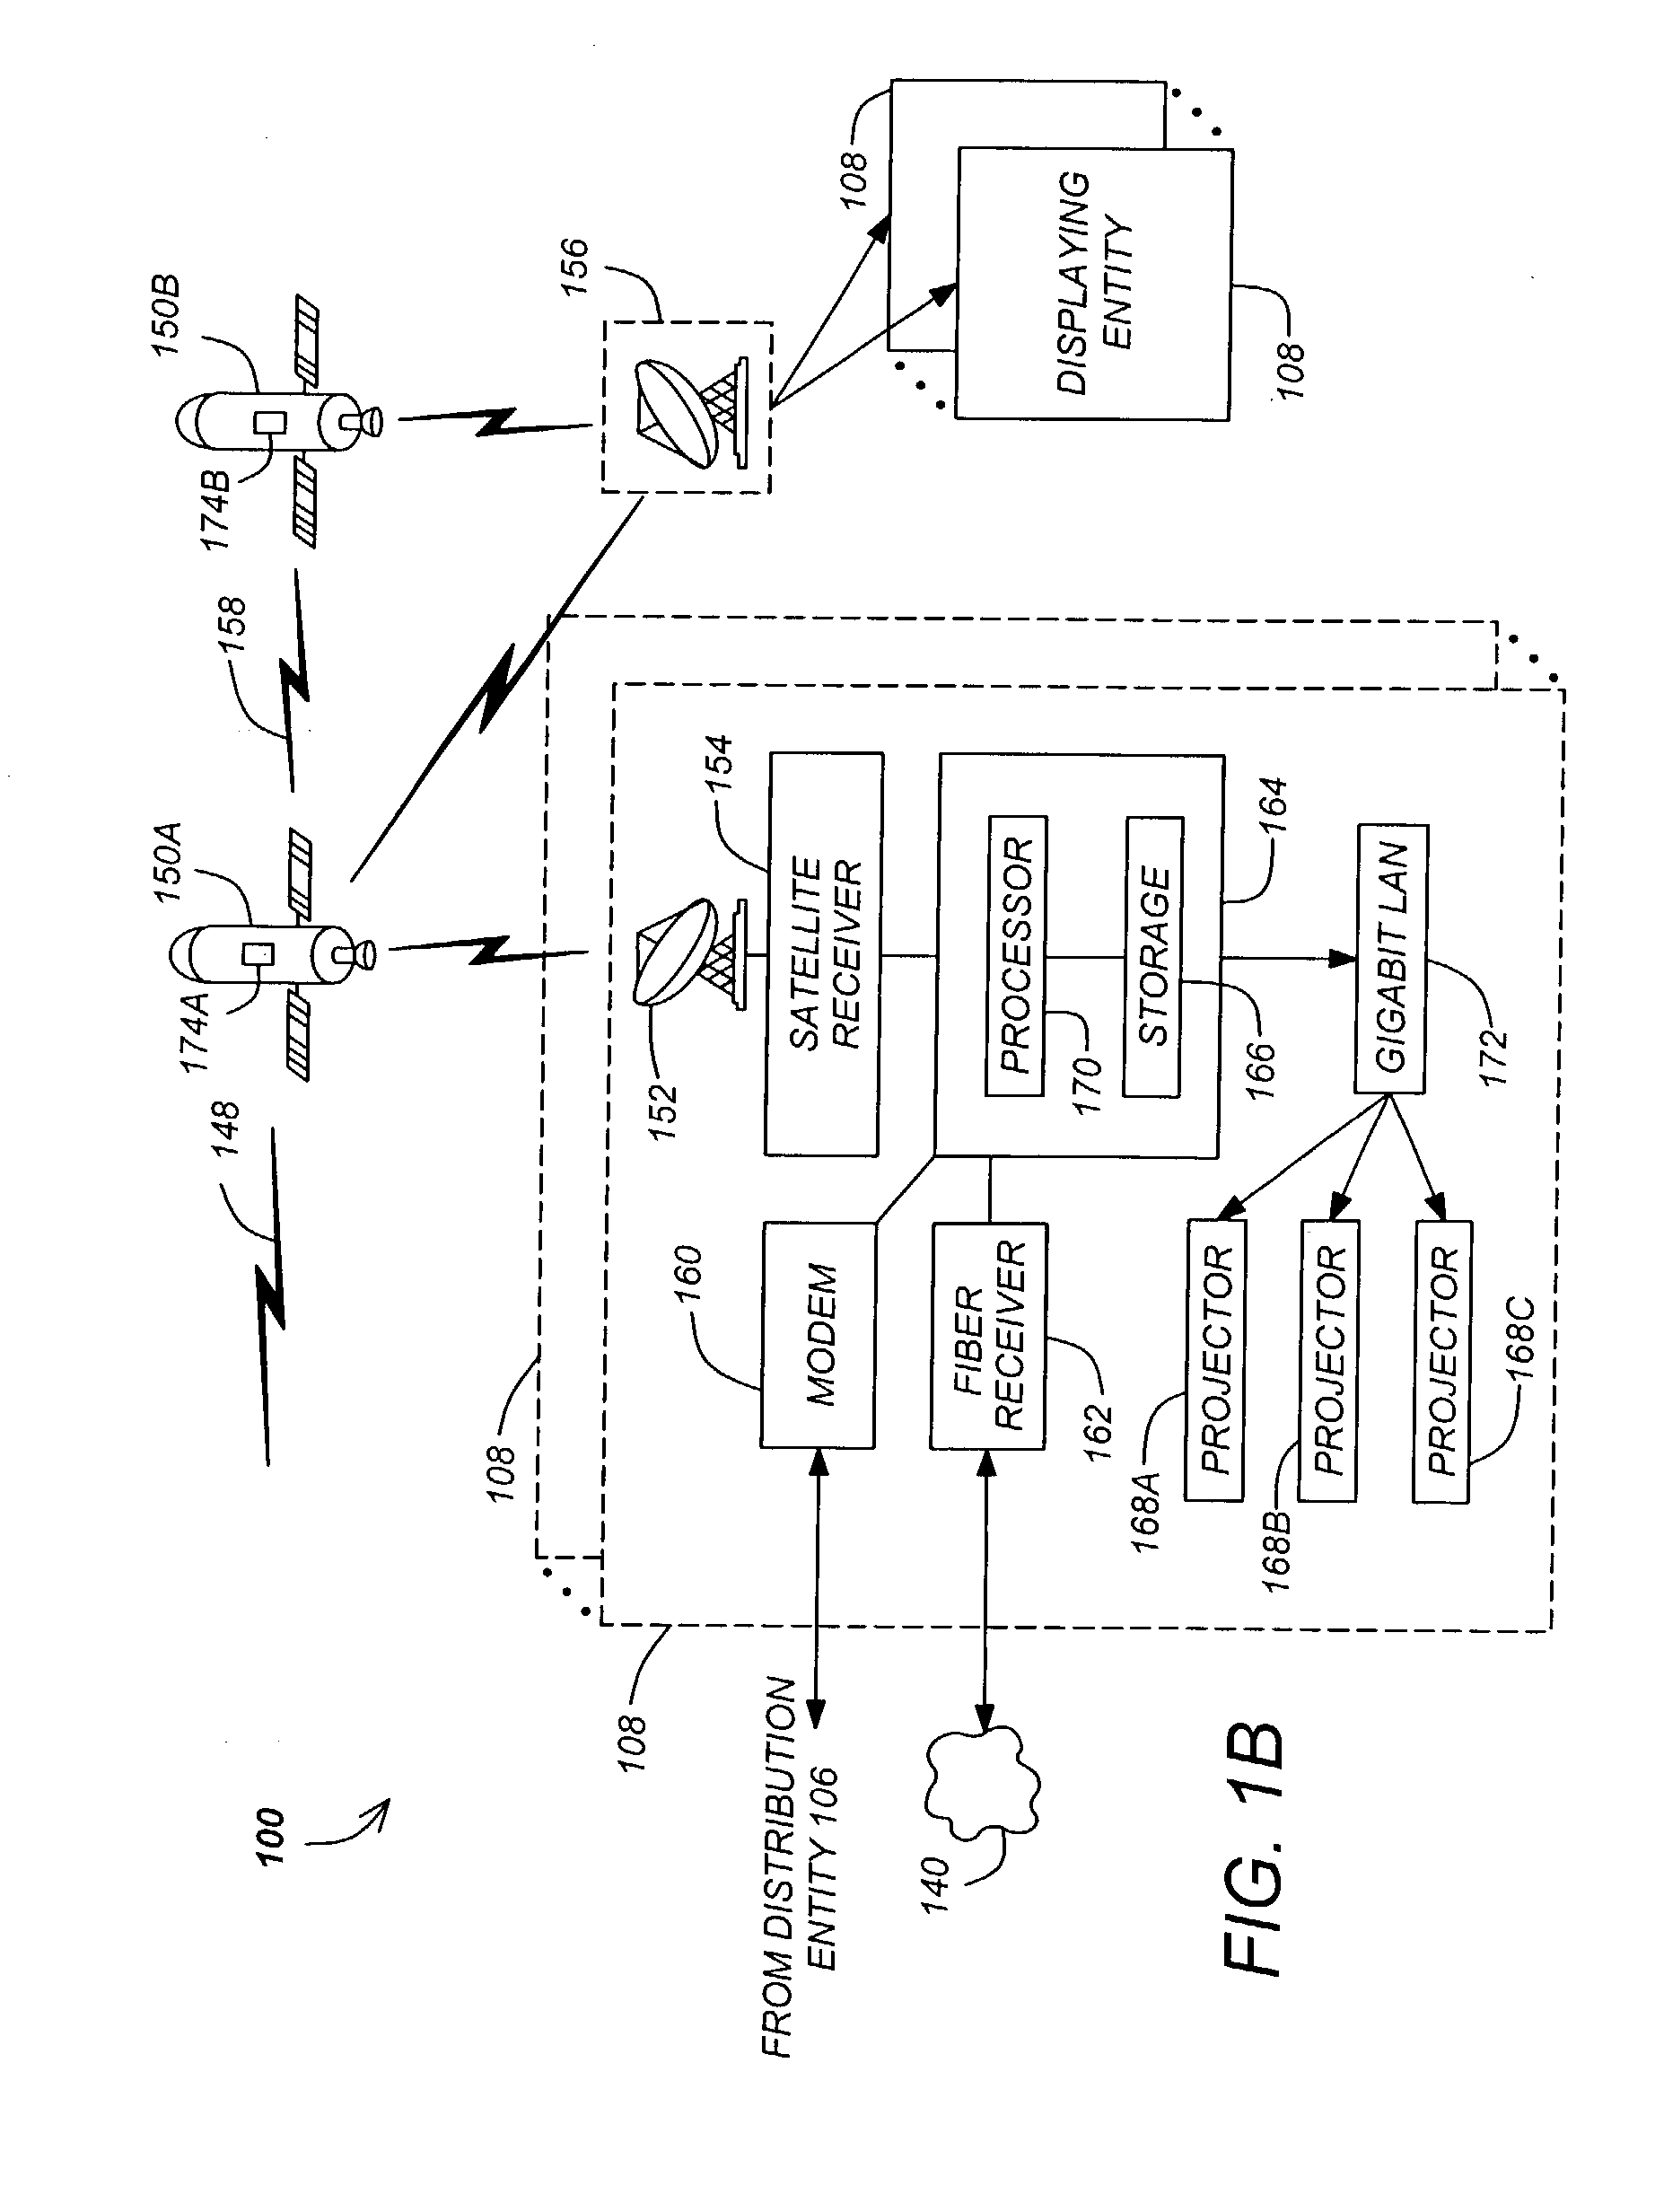 System and method for minimizing interference in a spot beam communication system